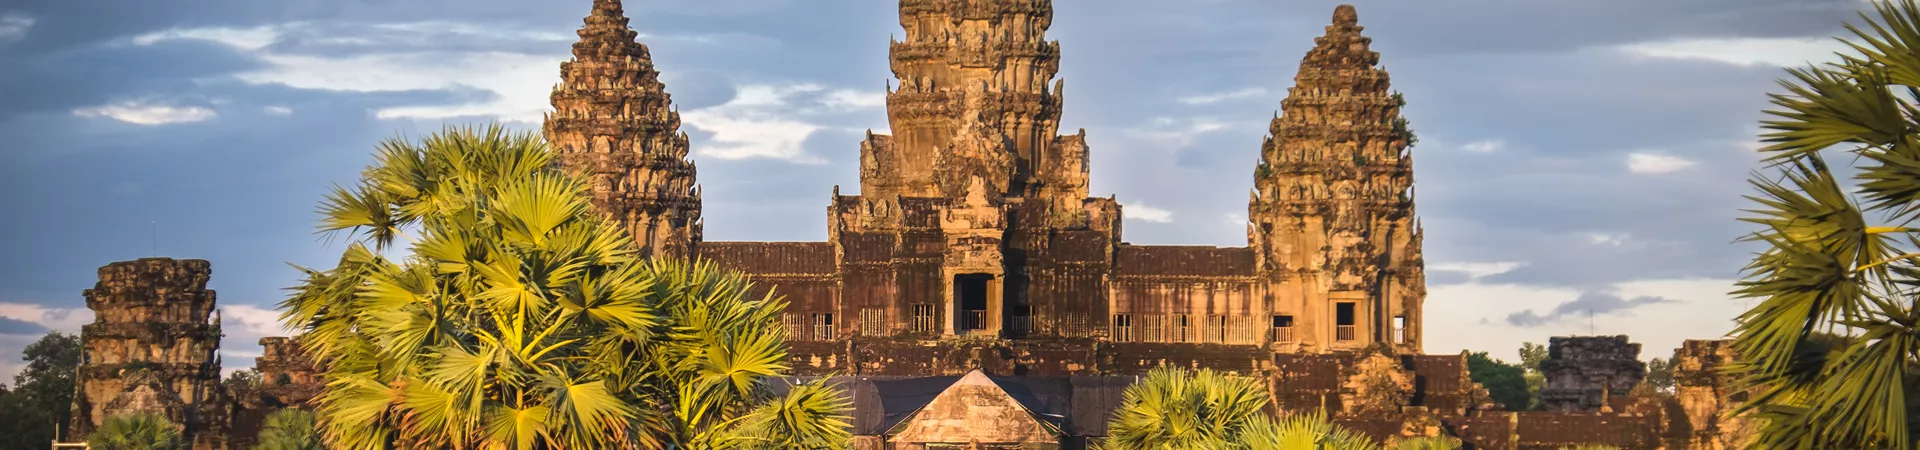 Cambodia Luxury Tours and Travel Guide